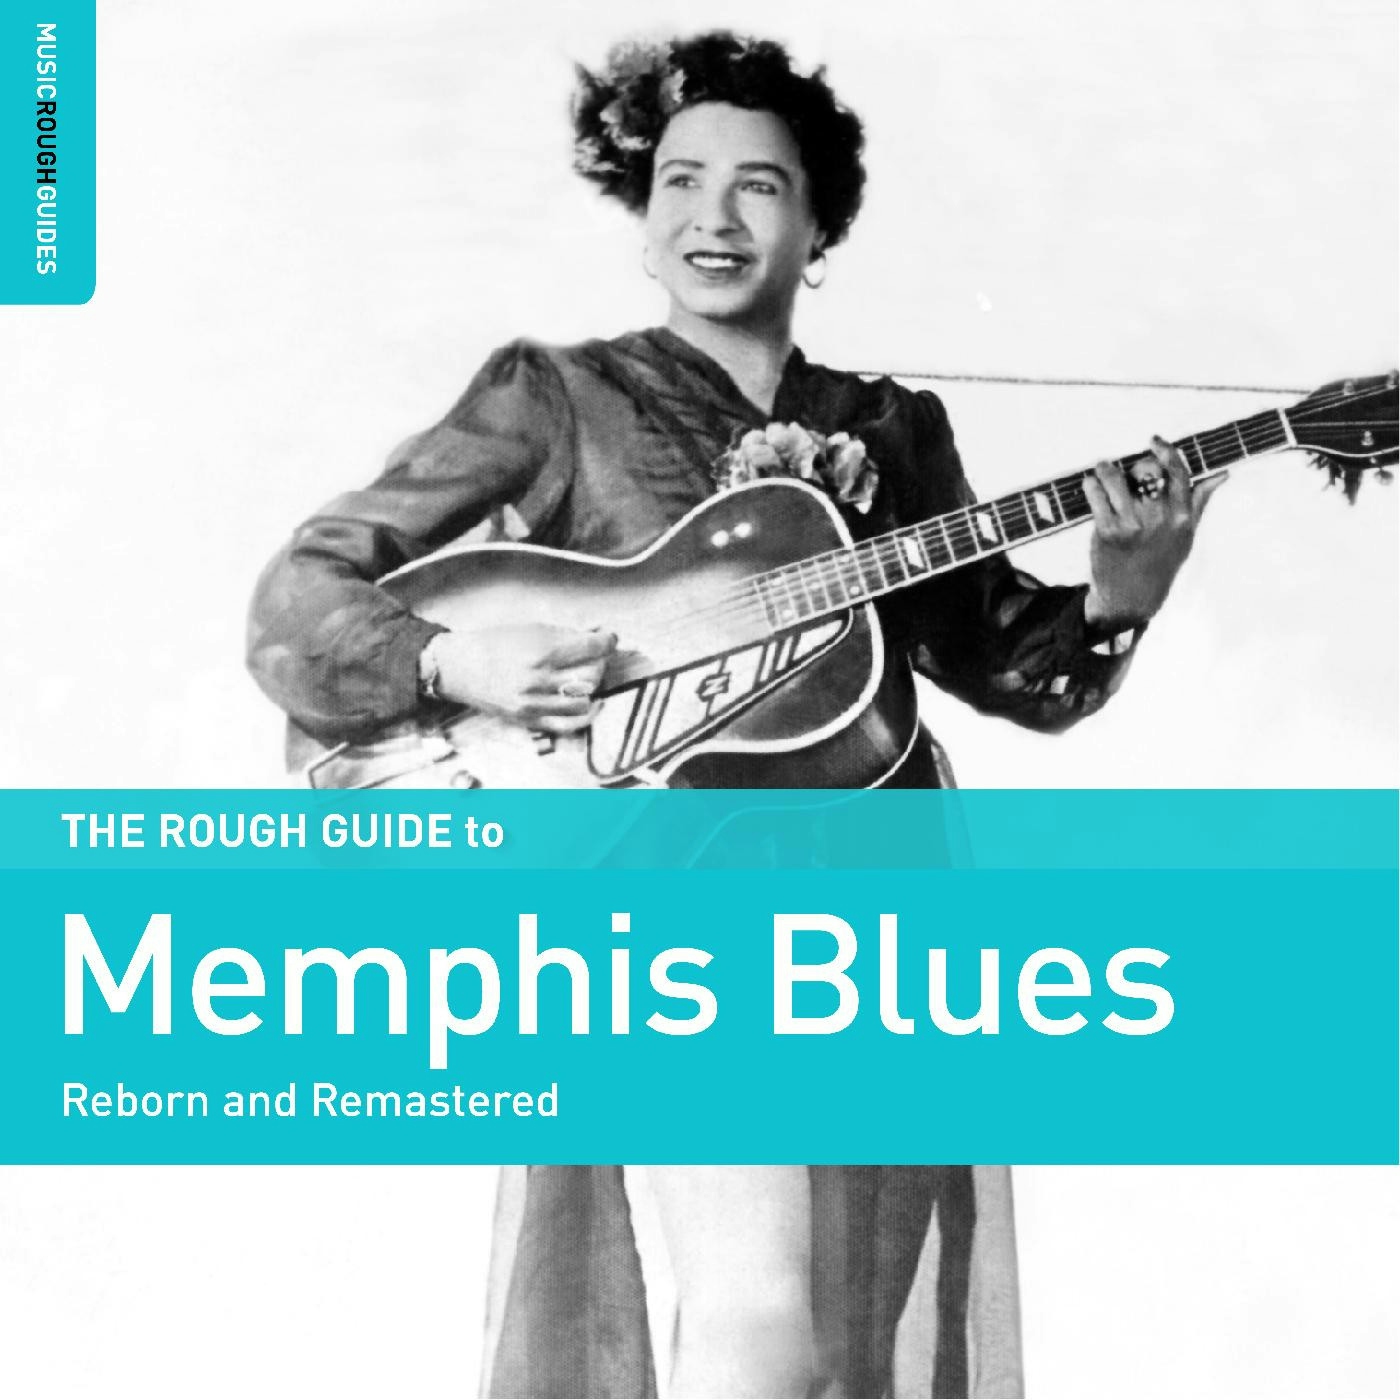 Album artwork for Album artwork for Rough Guide To Memphis Blues by Various Artists by Rough Guide To Memphis Blues - Various Artists